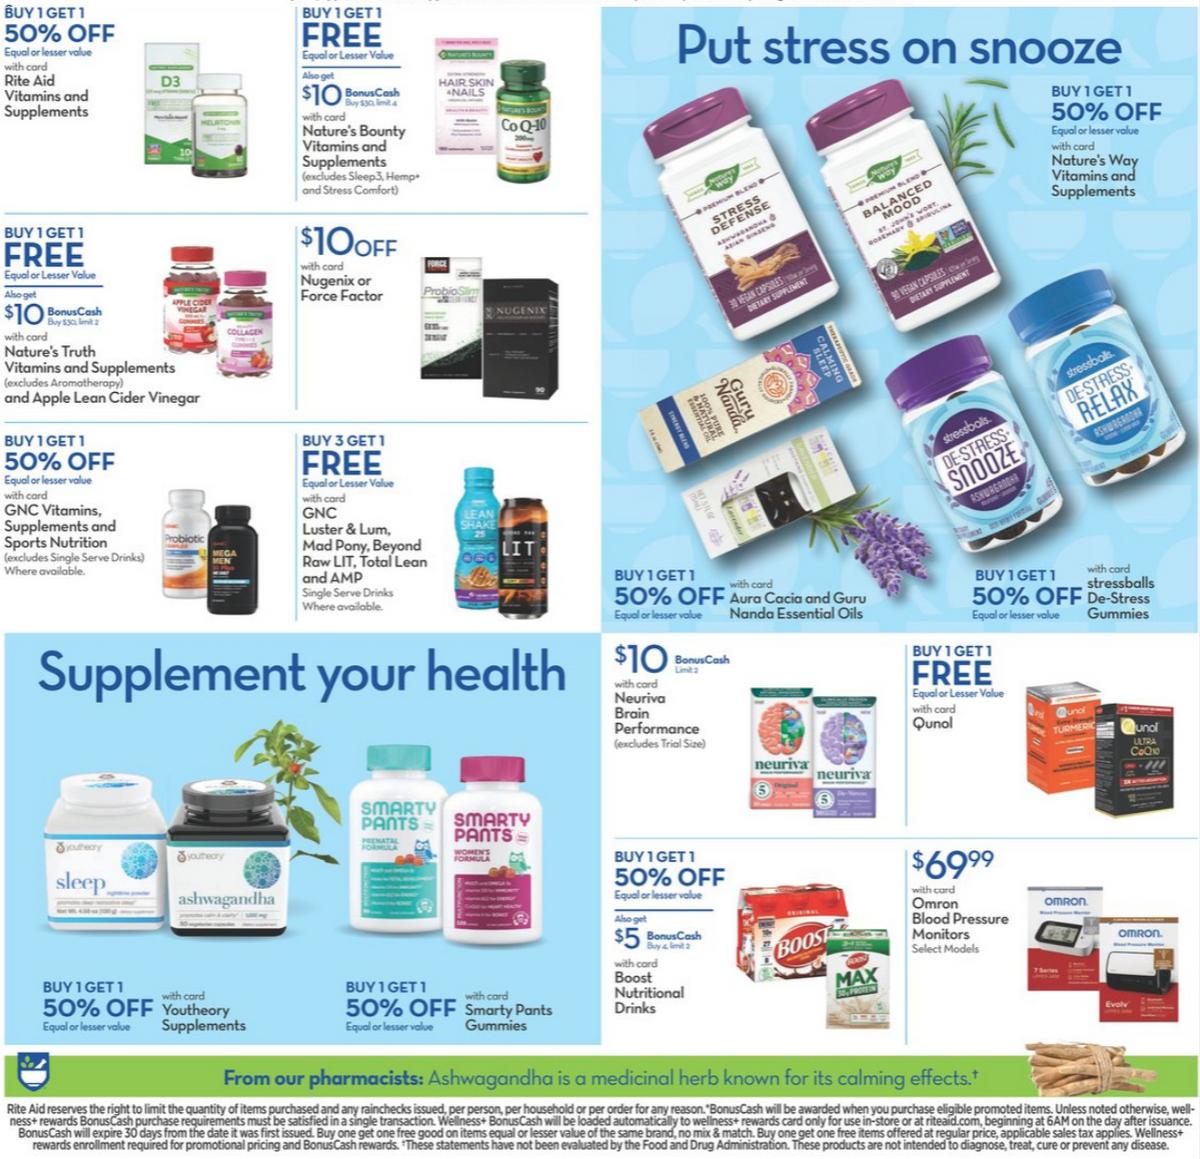 Rite Aid Weekly Ad from November 29